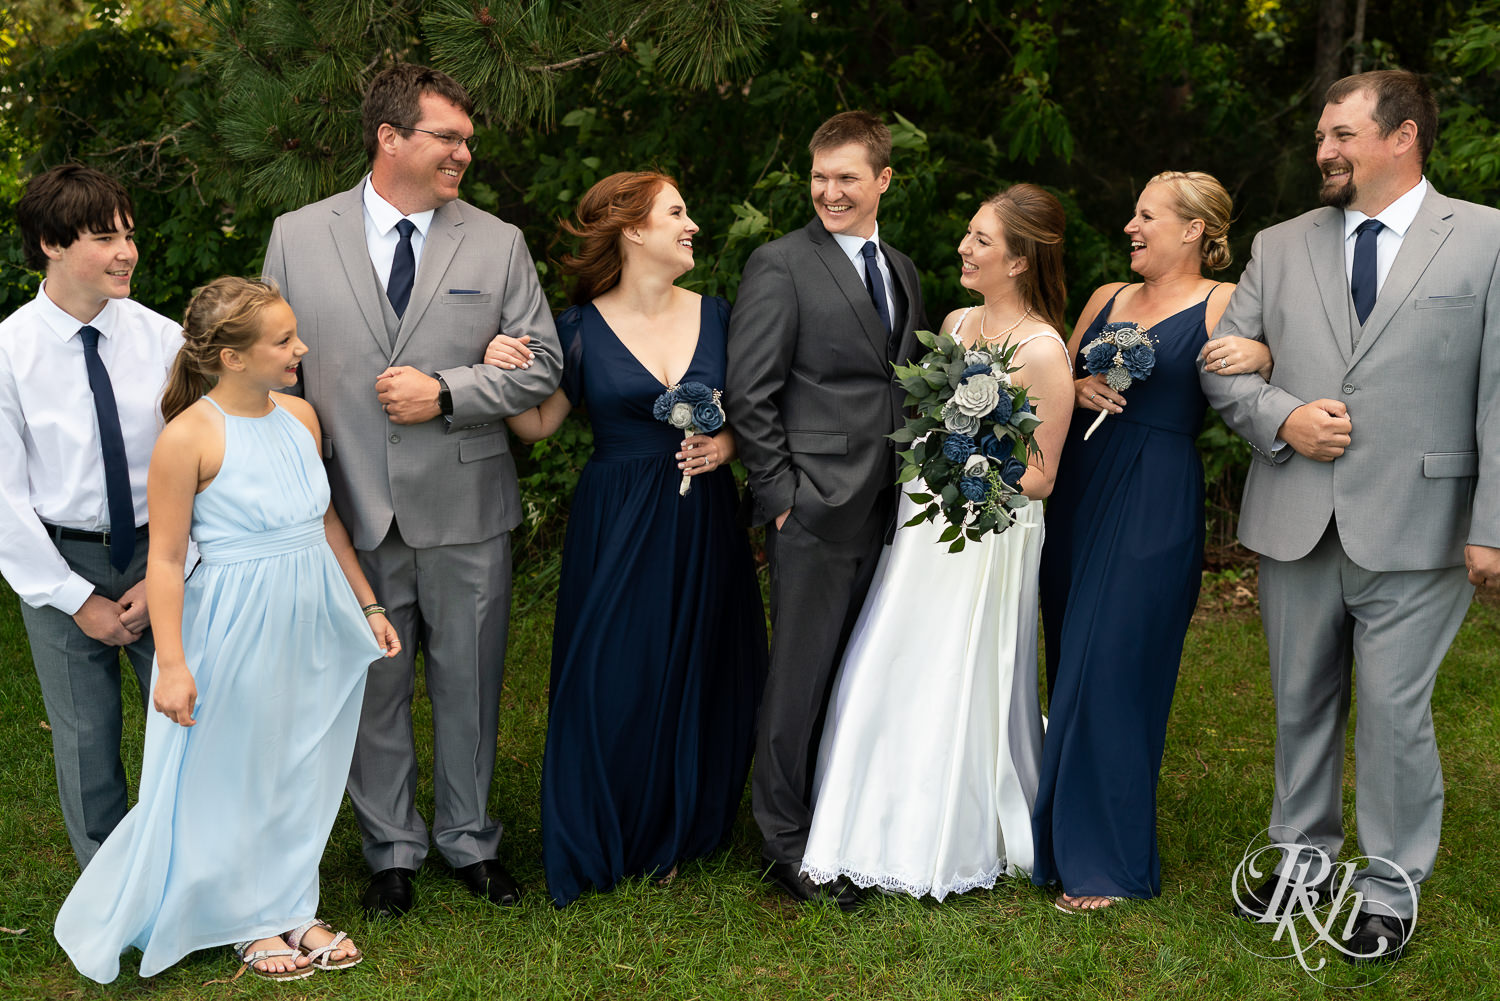 Wedding party at a summer wedding at Stone Lion Winery and Events in Isanti, Minnesota. 